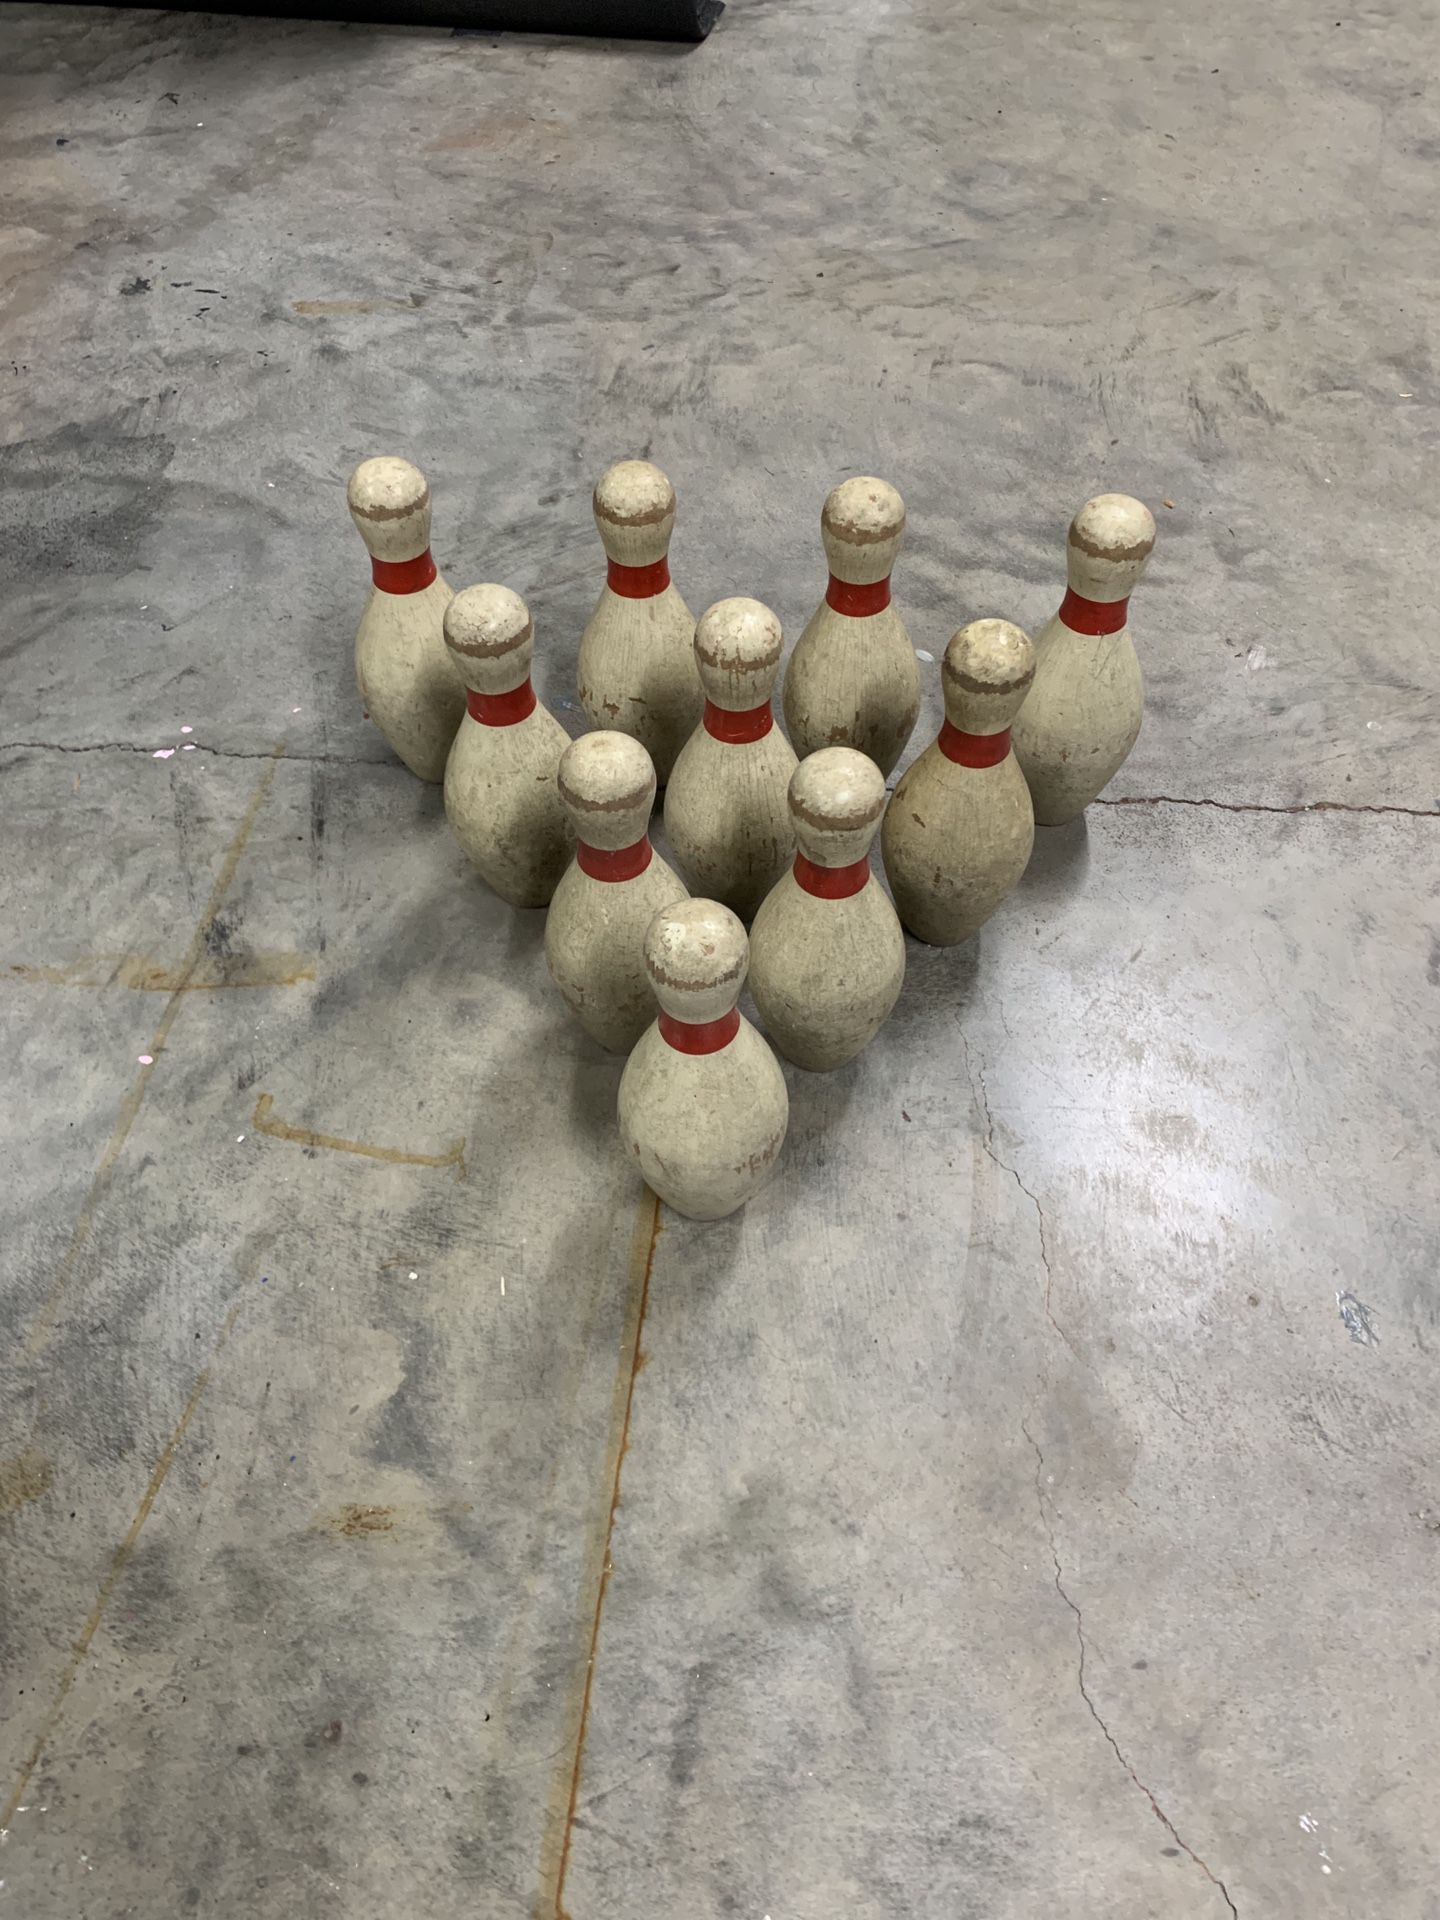 Wooden Bowling Pins - 7” - Used